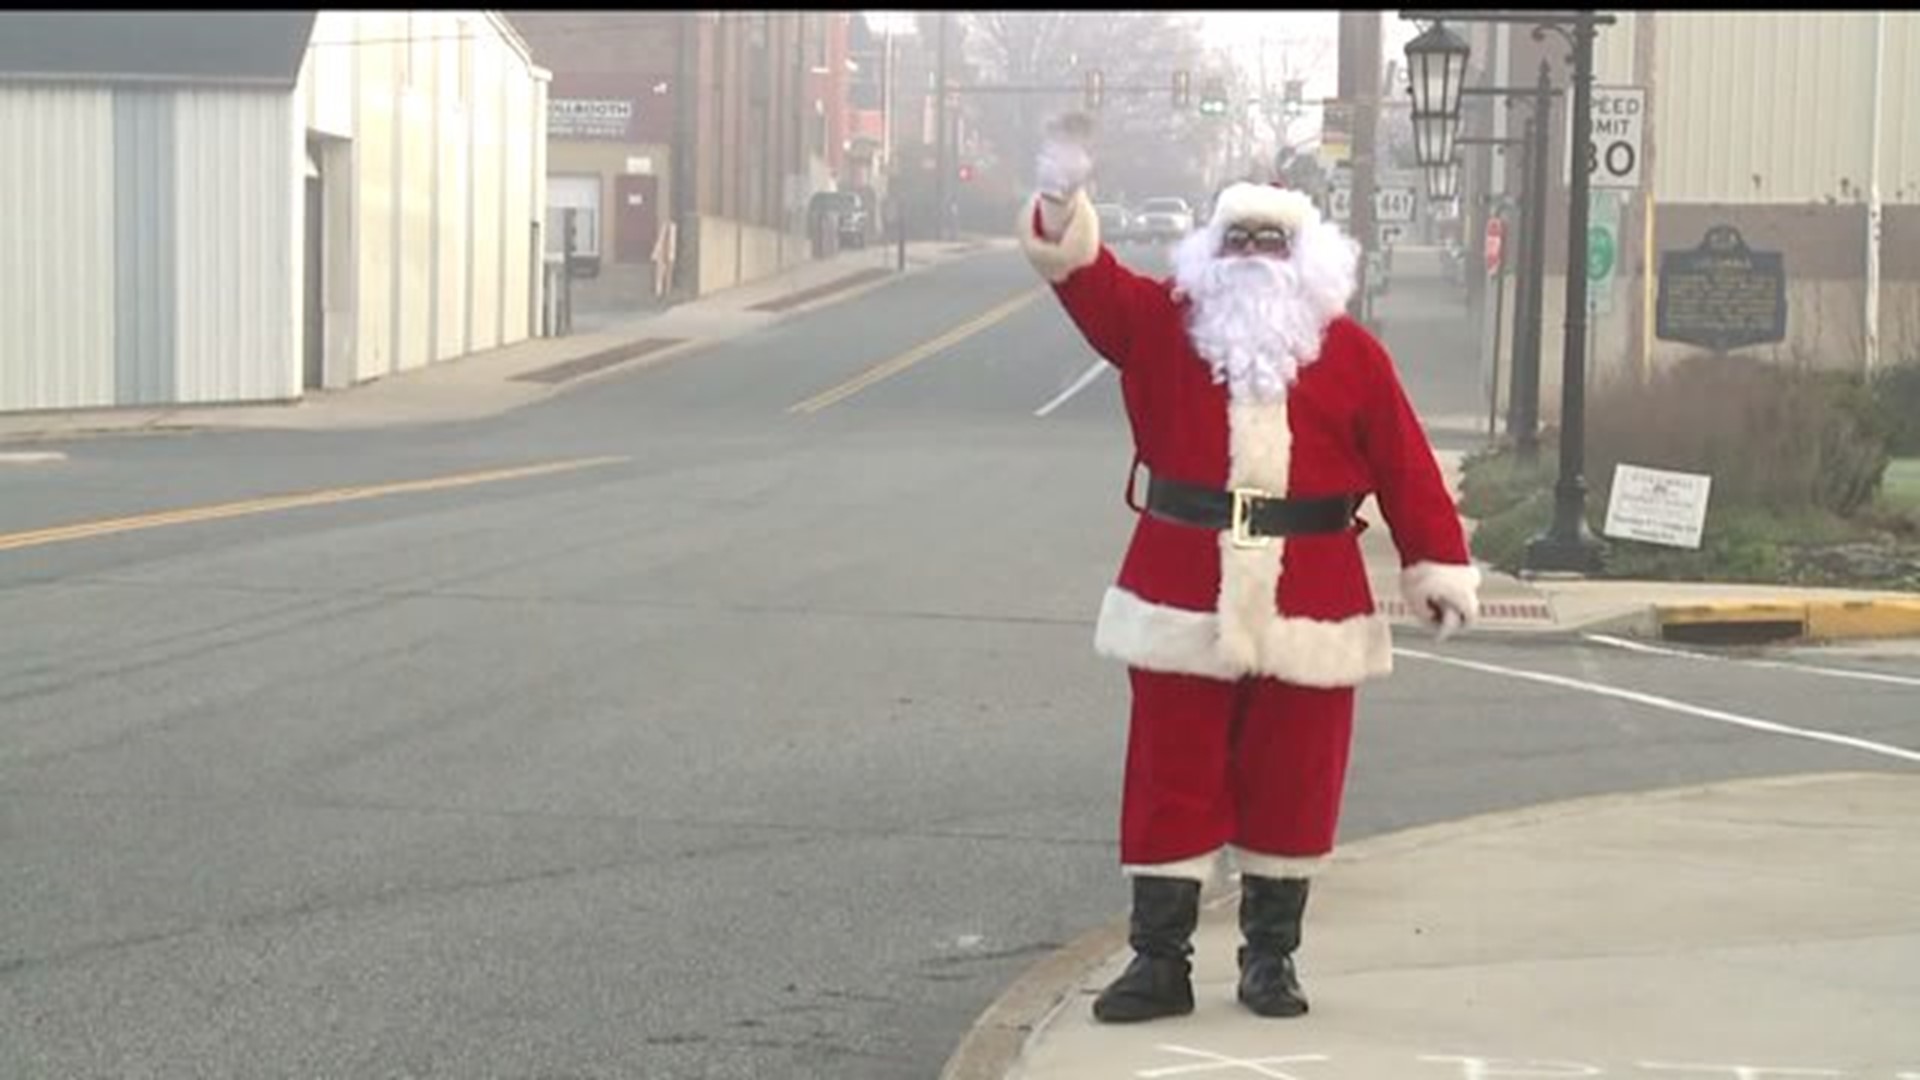 96.1`s Annual Toys For Tots Challenge On The Columbia-Wrightsville Bridge In Lancaster County